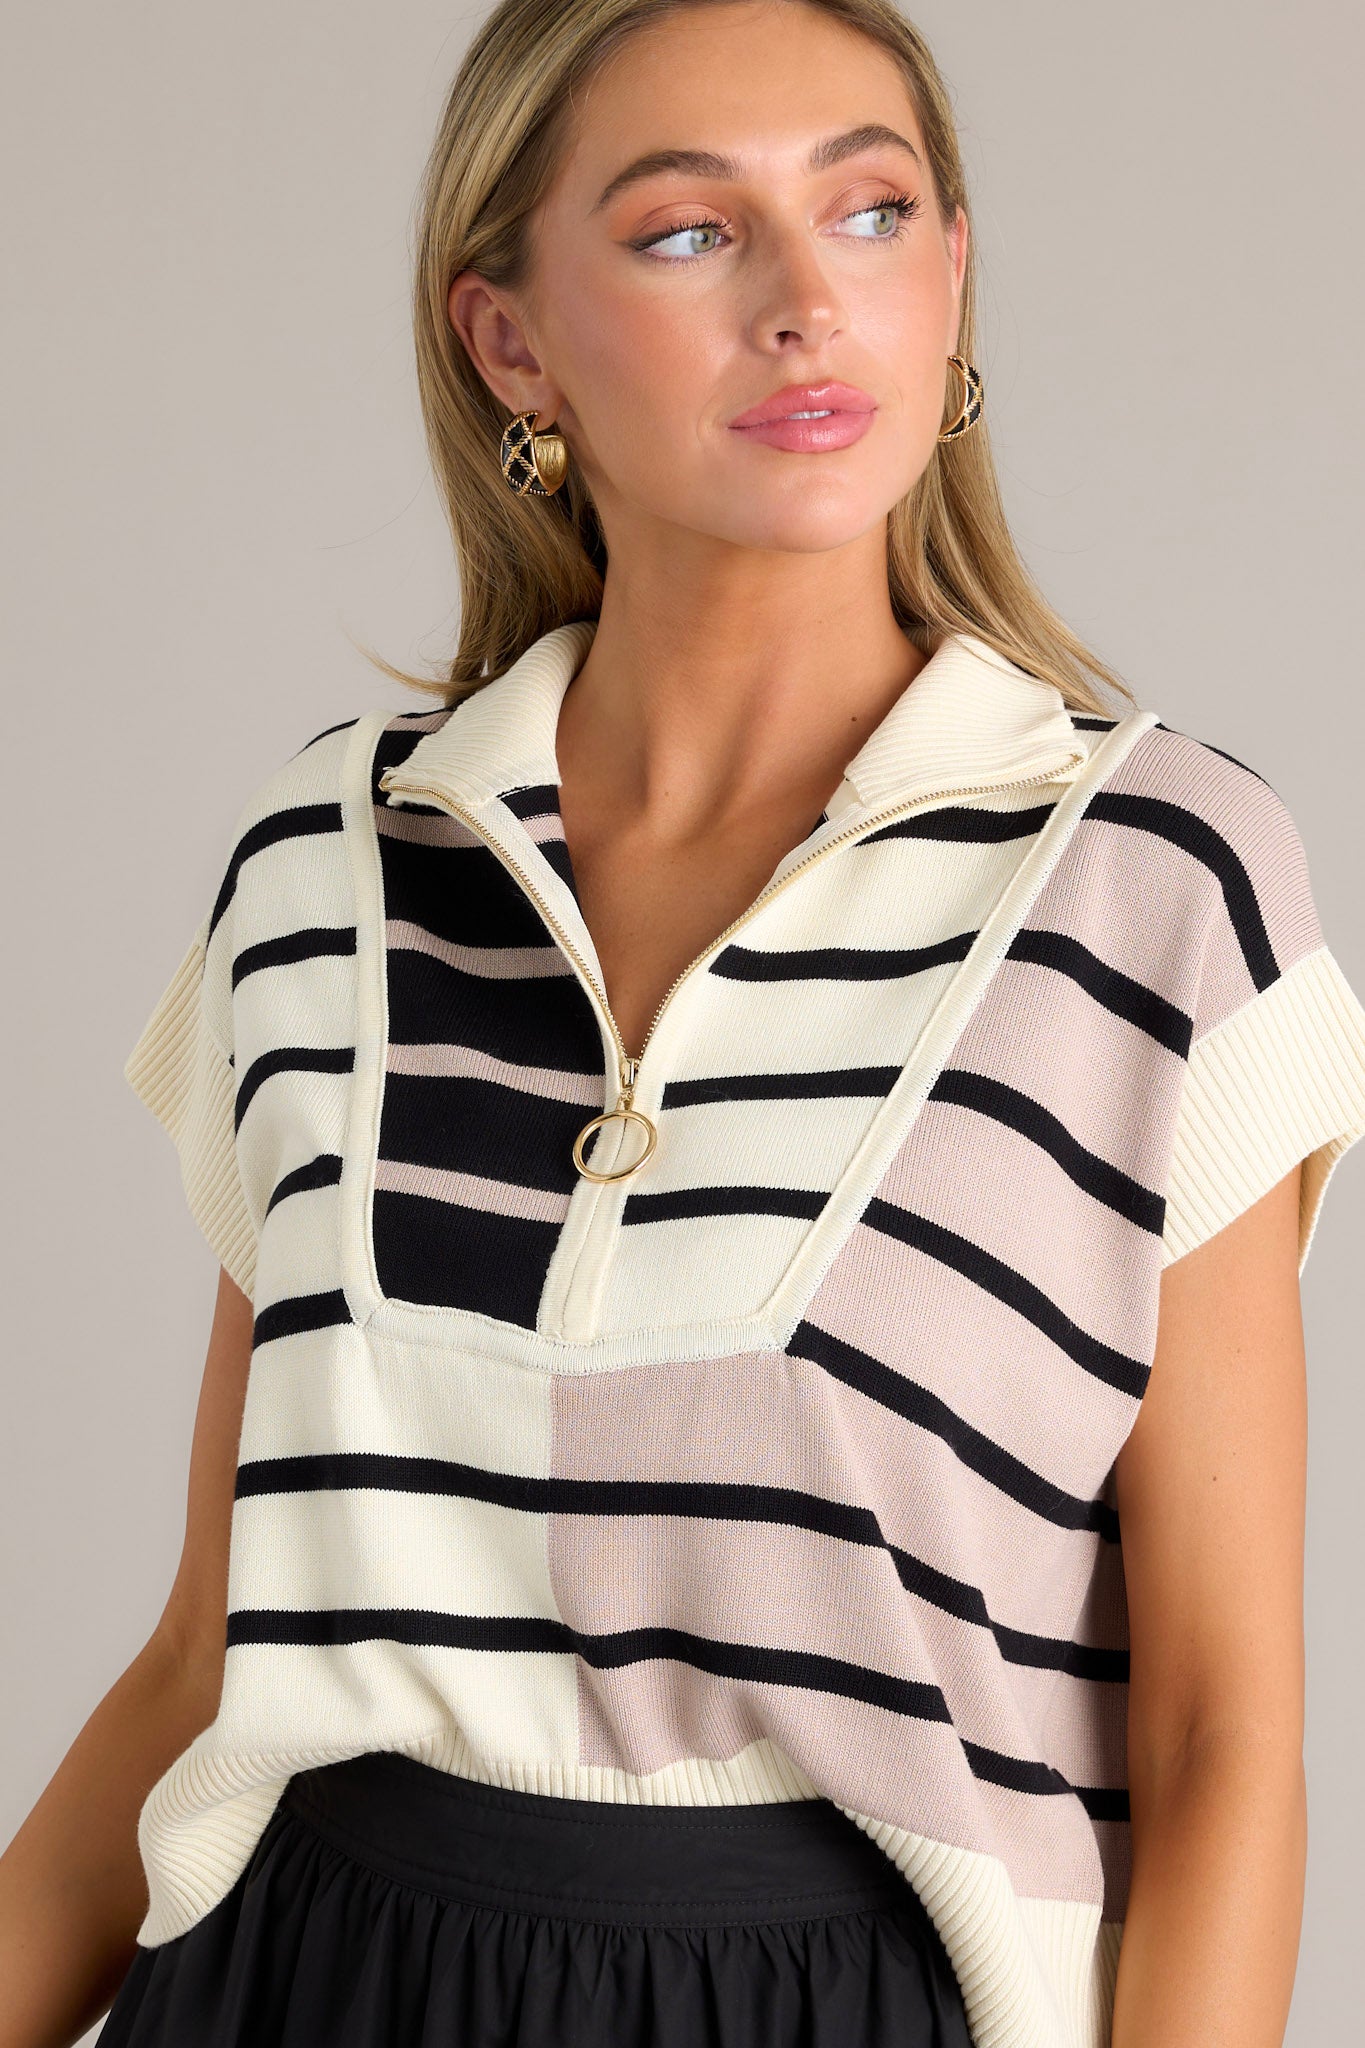 This beige sweater features a ribbed collared neckline, gold hardware, a functional half zip design, a bold striped design, ribbed cap sleeves, and and a ribbed hemline.